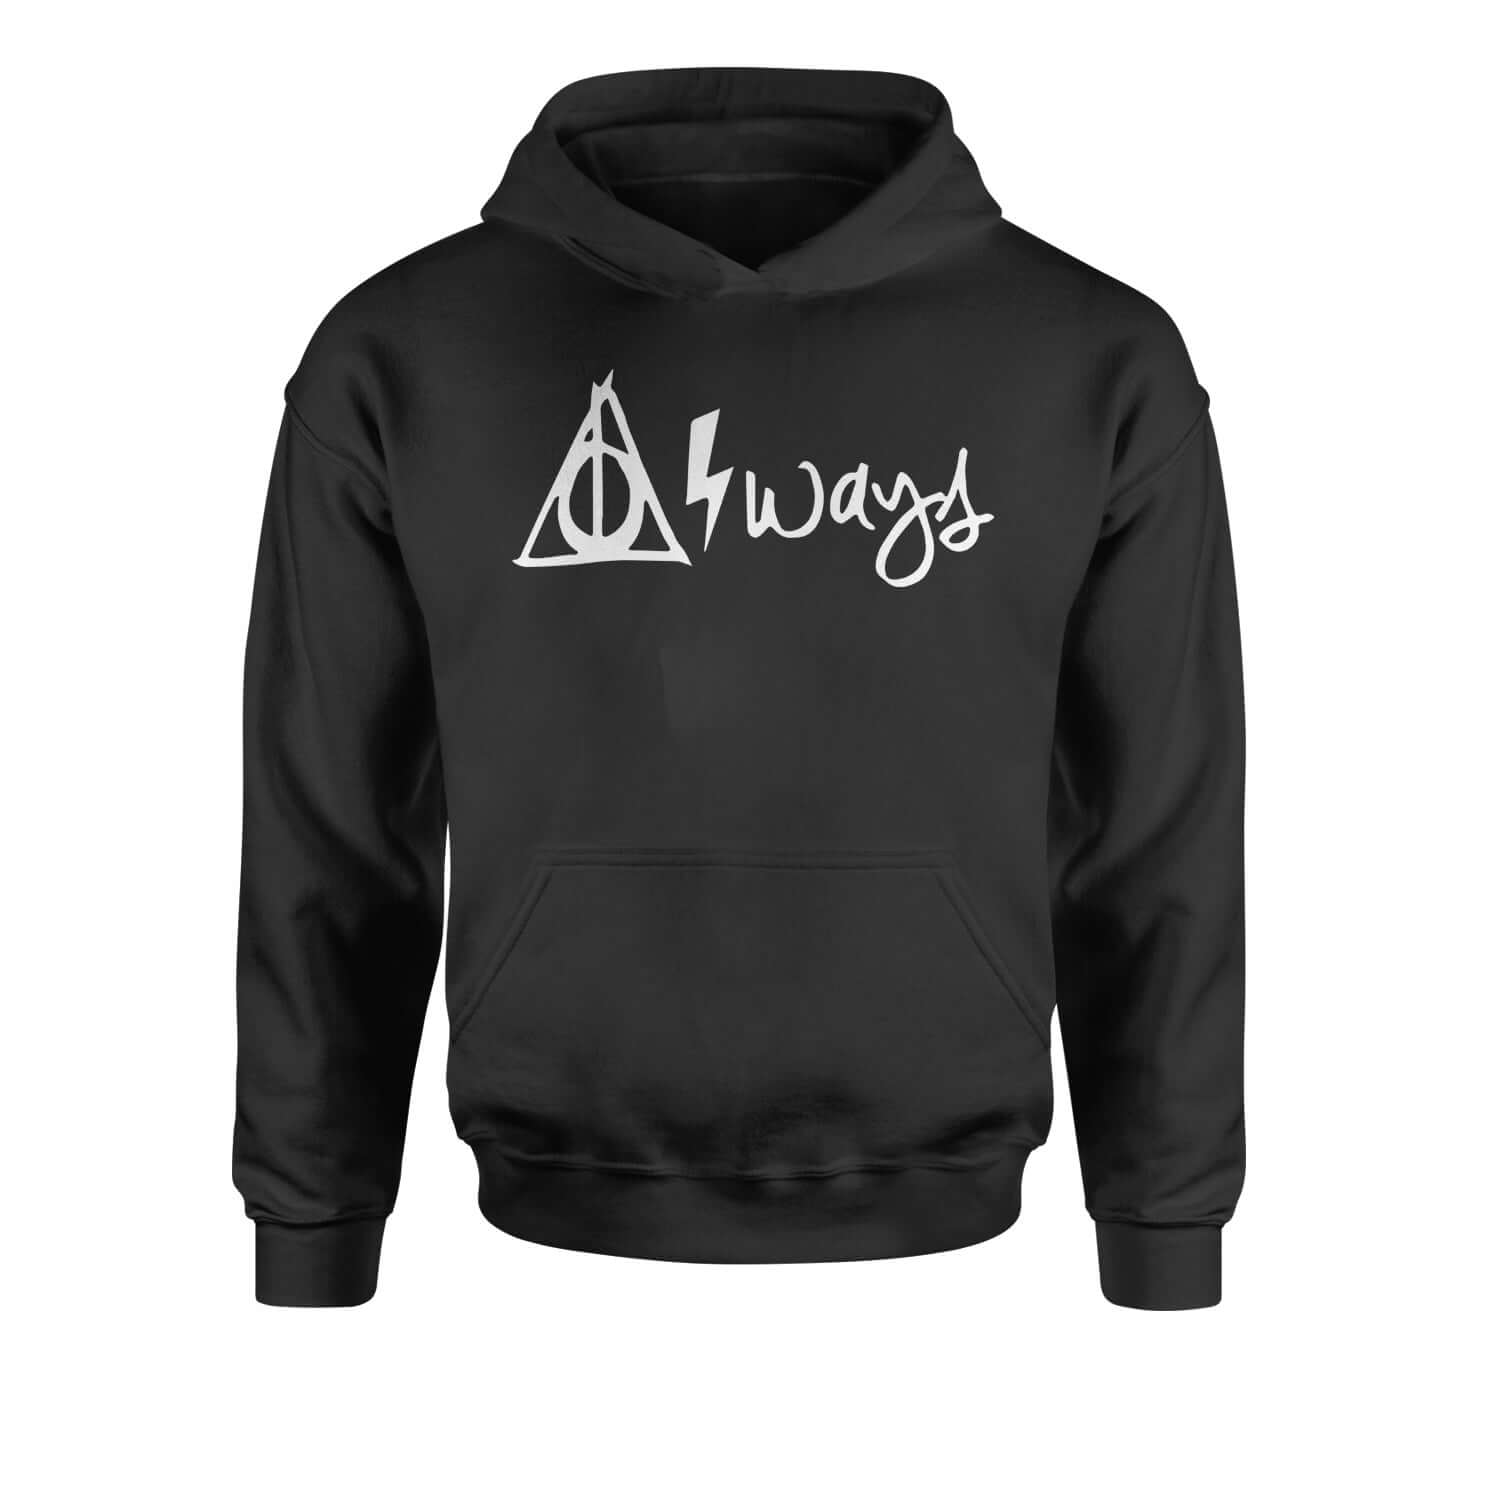 Always Lightning Bolt Youth-Sized Hoodie #expressiontees by Expression Tees